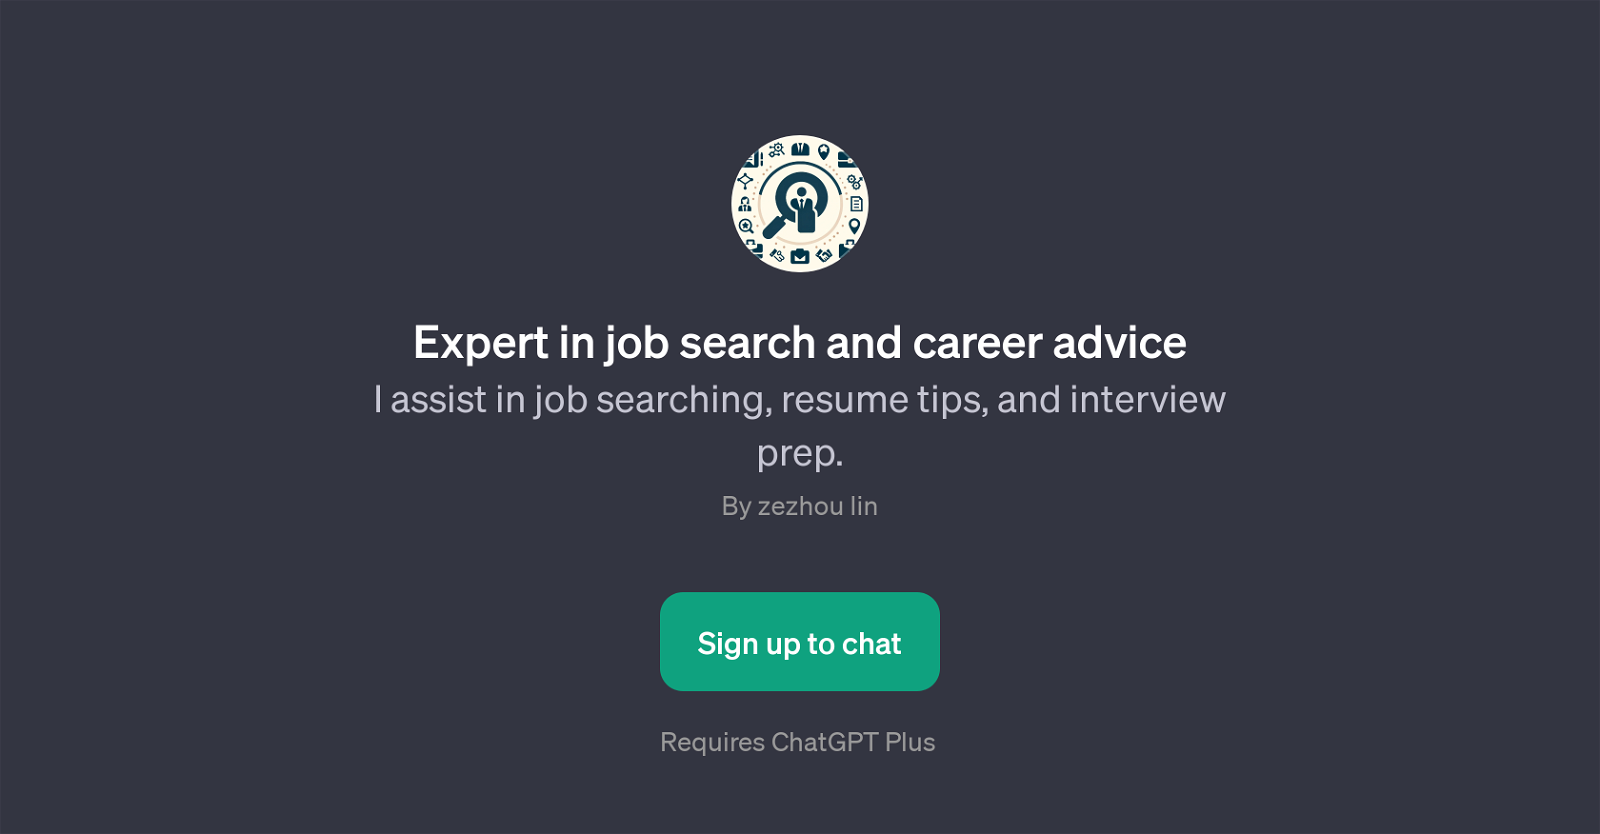 Expert in job search and career advice website